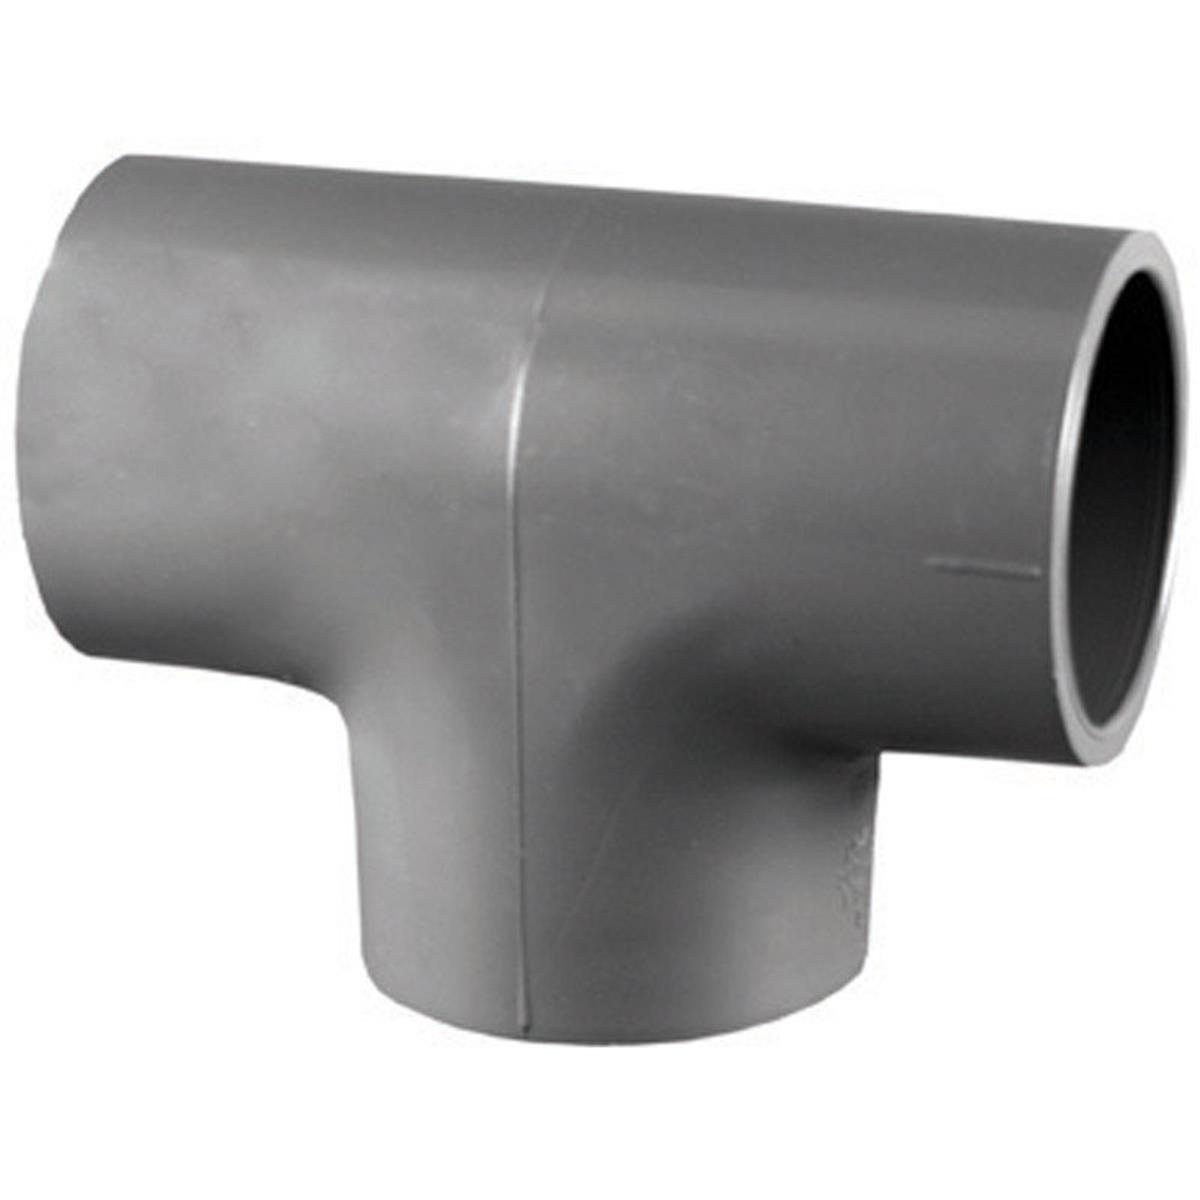 Picture of Charlotte Pipe 40581 1 x 1 x 1 in. dia. Slip to Slip PVC Schedule 80 Tee  Gray